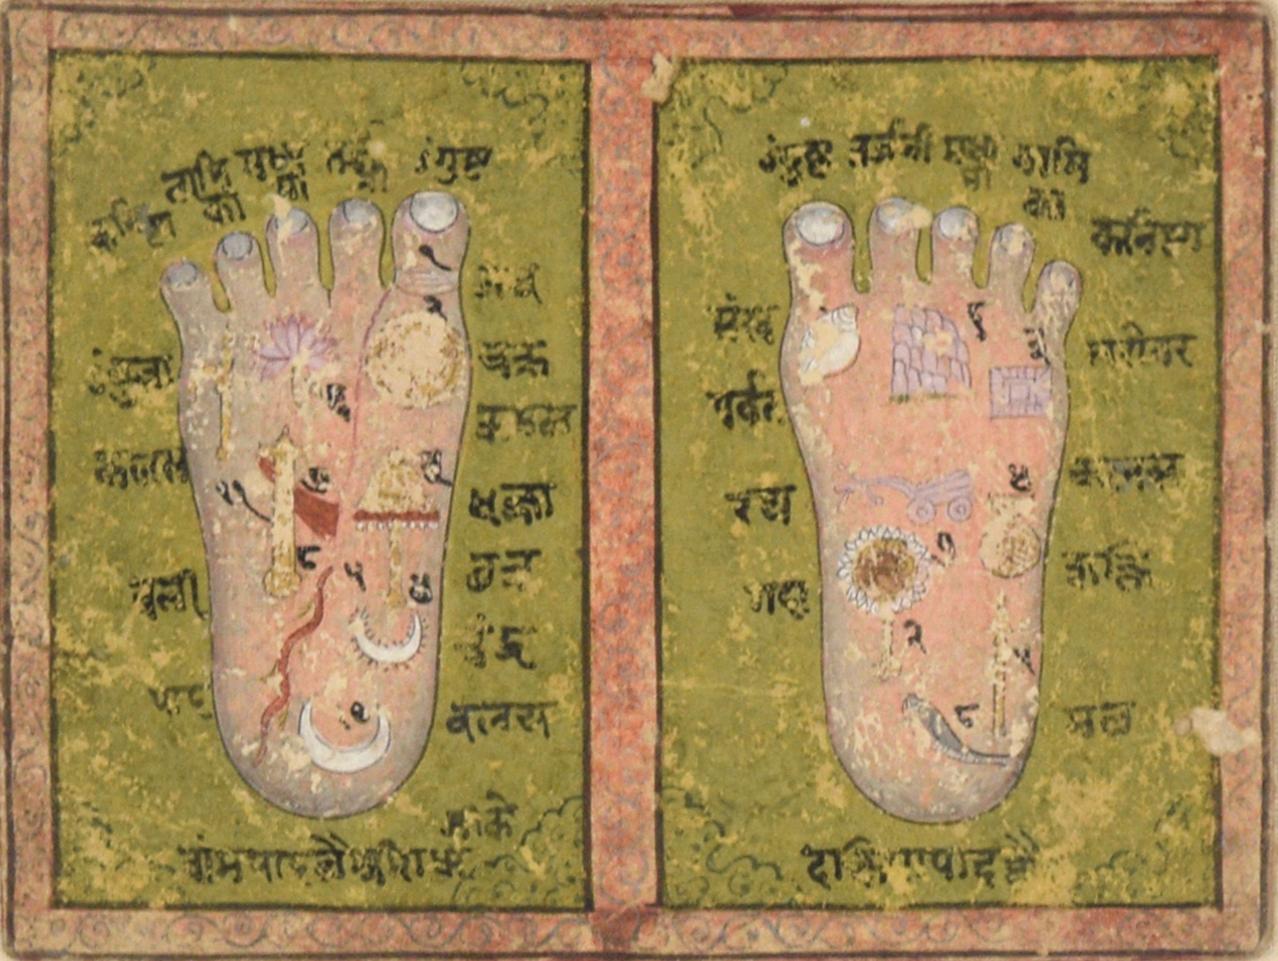 Finely detailed illustration of the feet of Lord Rama. The feet are labeled with illustrative symbols, including a lotus flower, shells, and crescent moons. There are a total of 17 symbols on the feet. Delicate vines and patterning surround the